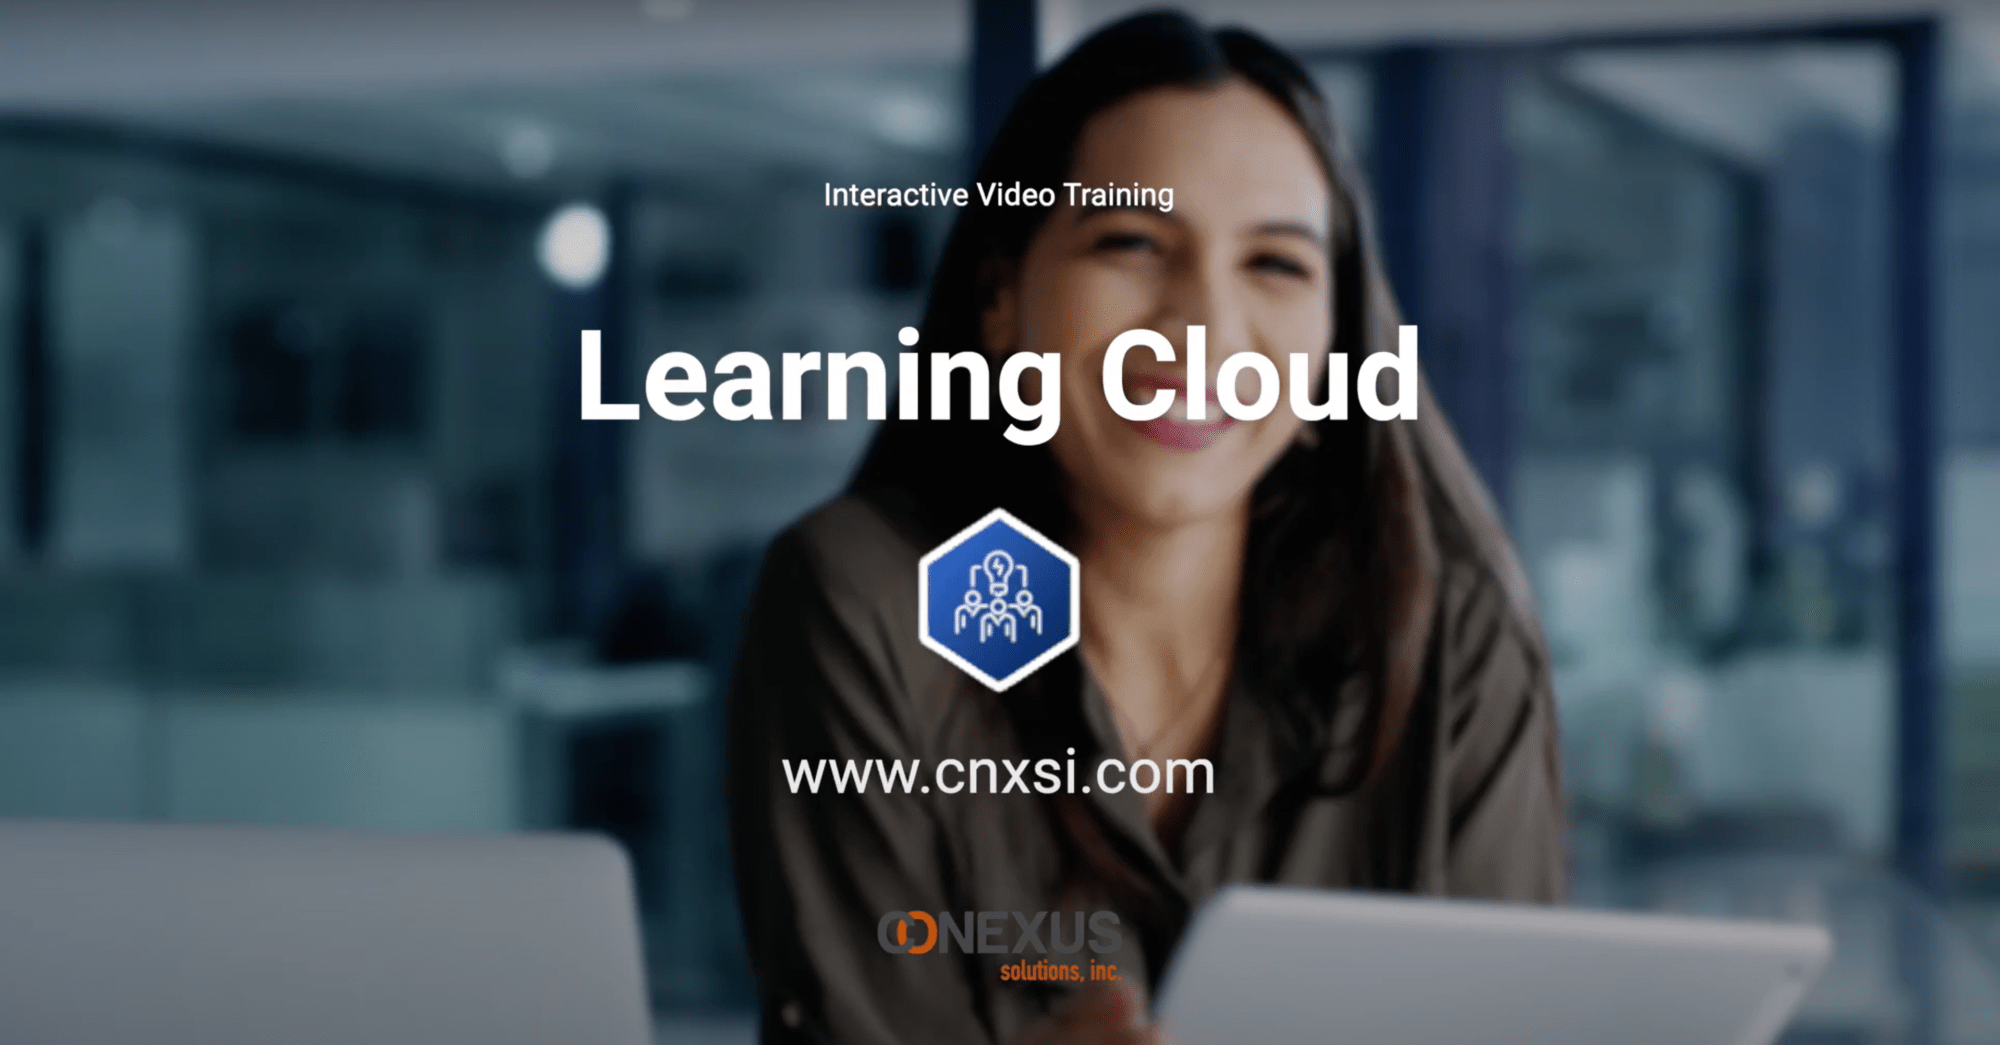 Learning Cloud Introduction